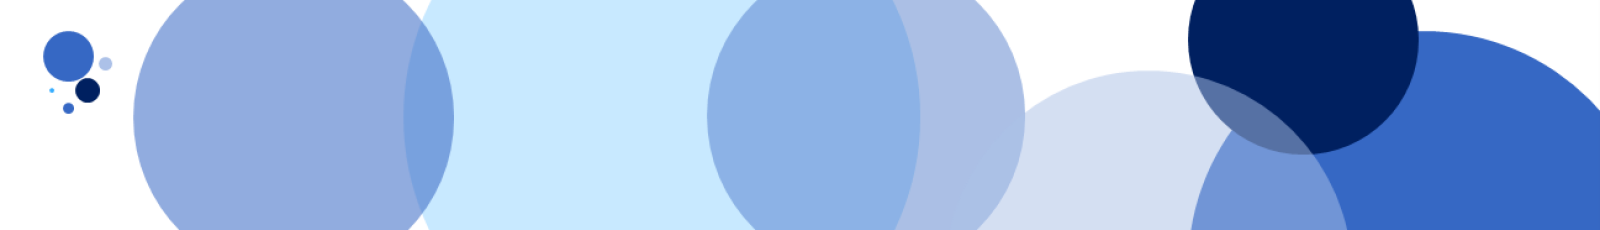 cropped-banner-background.png – Bluecover